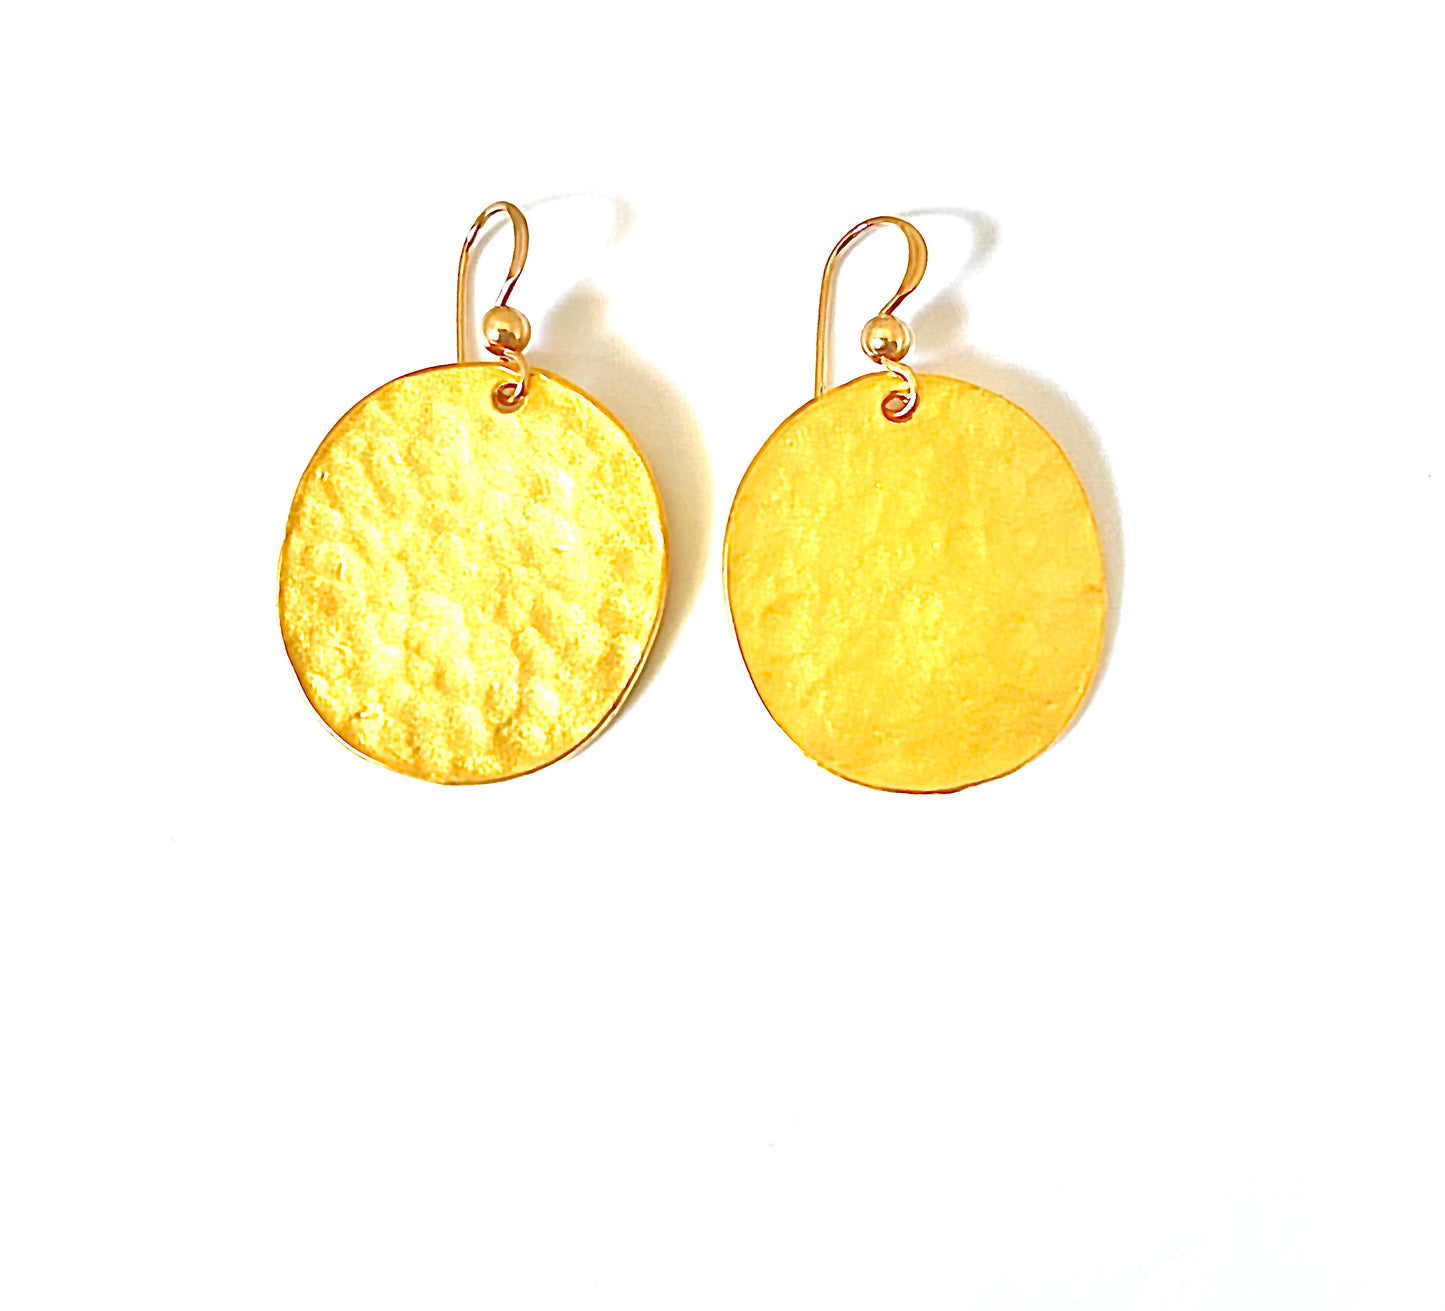 Mate gold Statement earrings